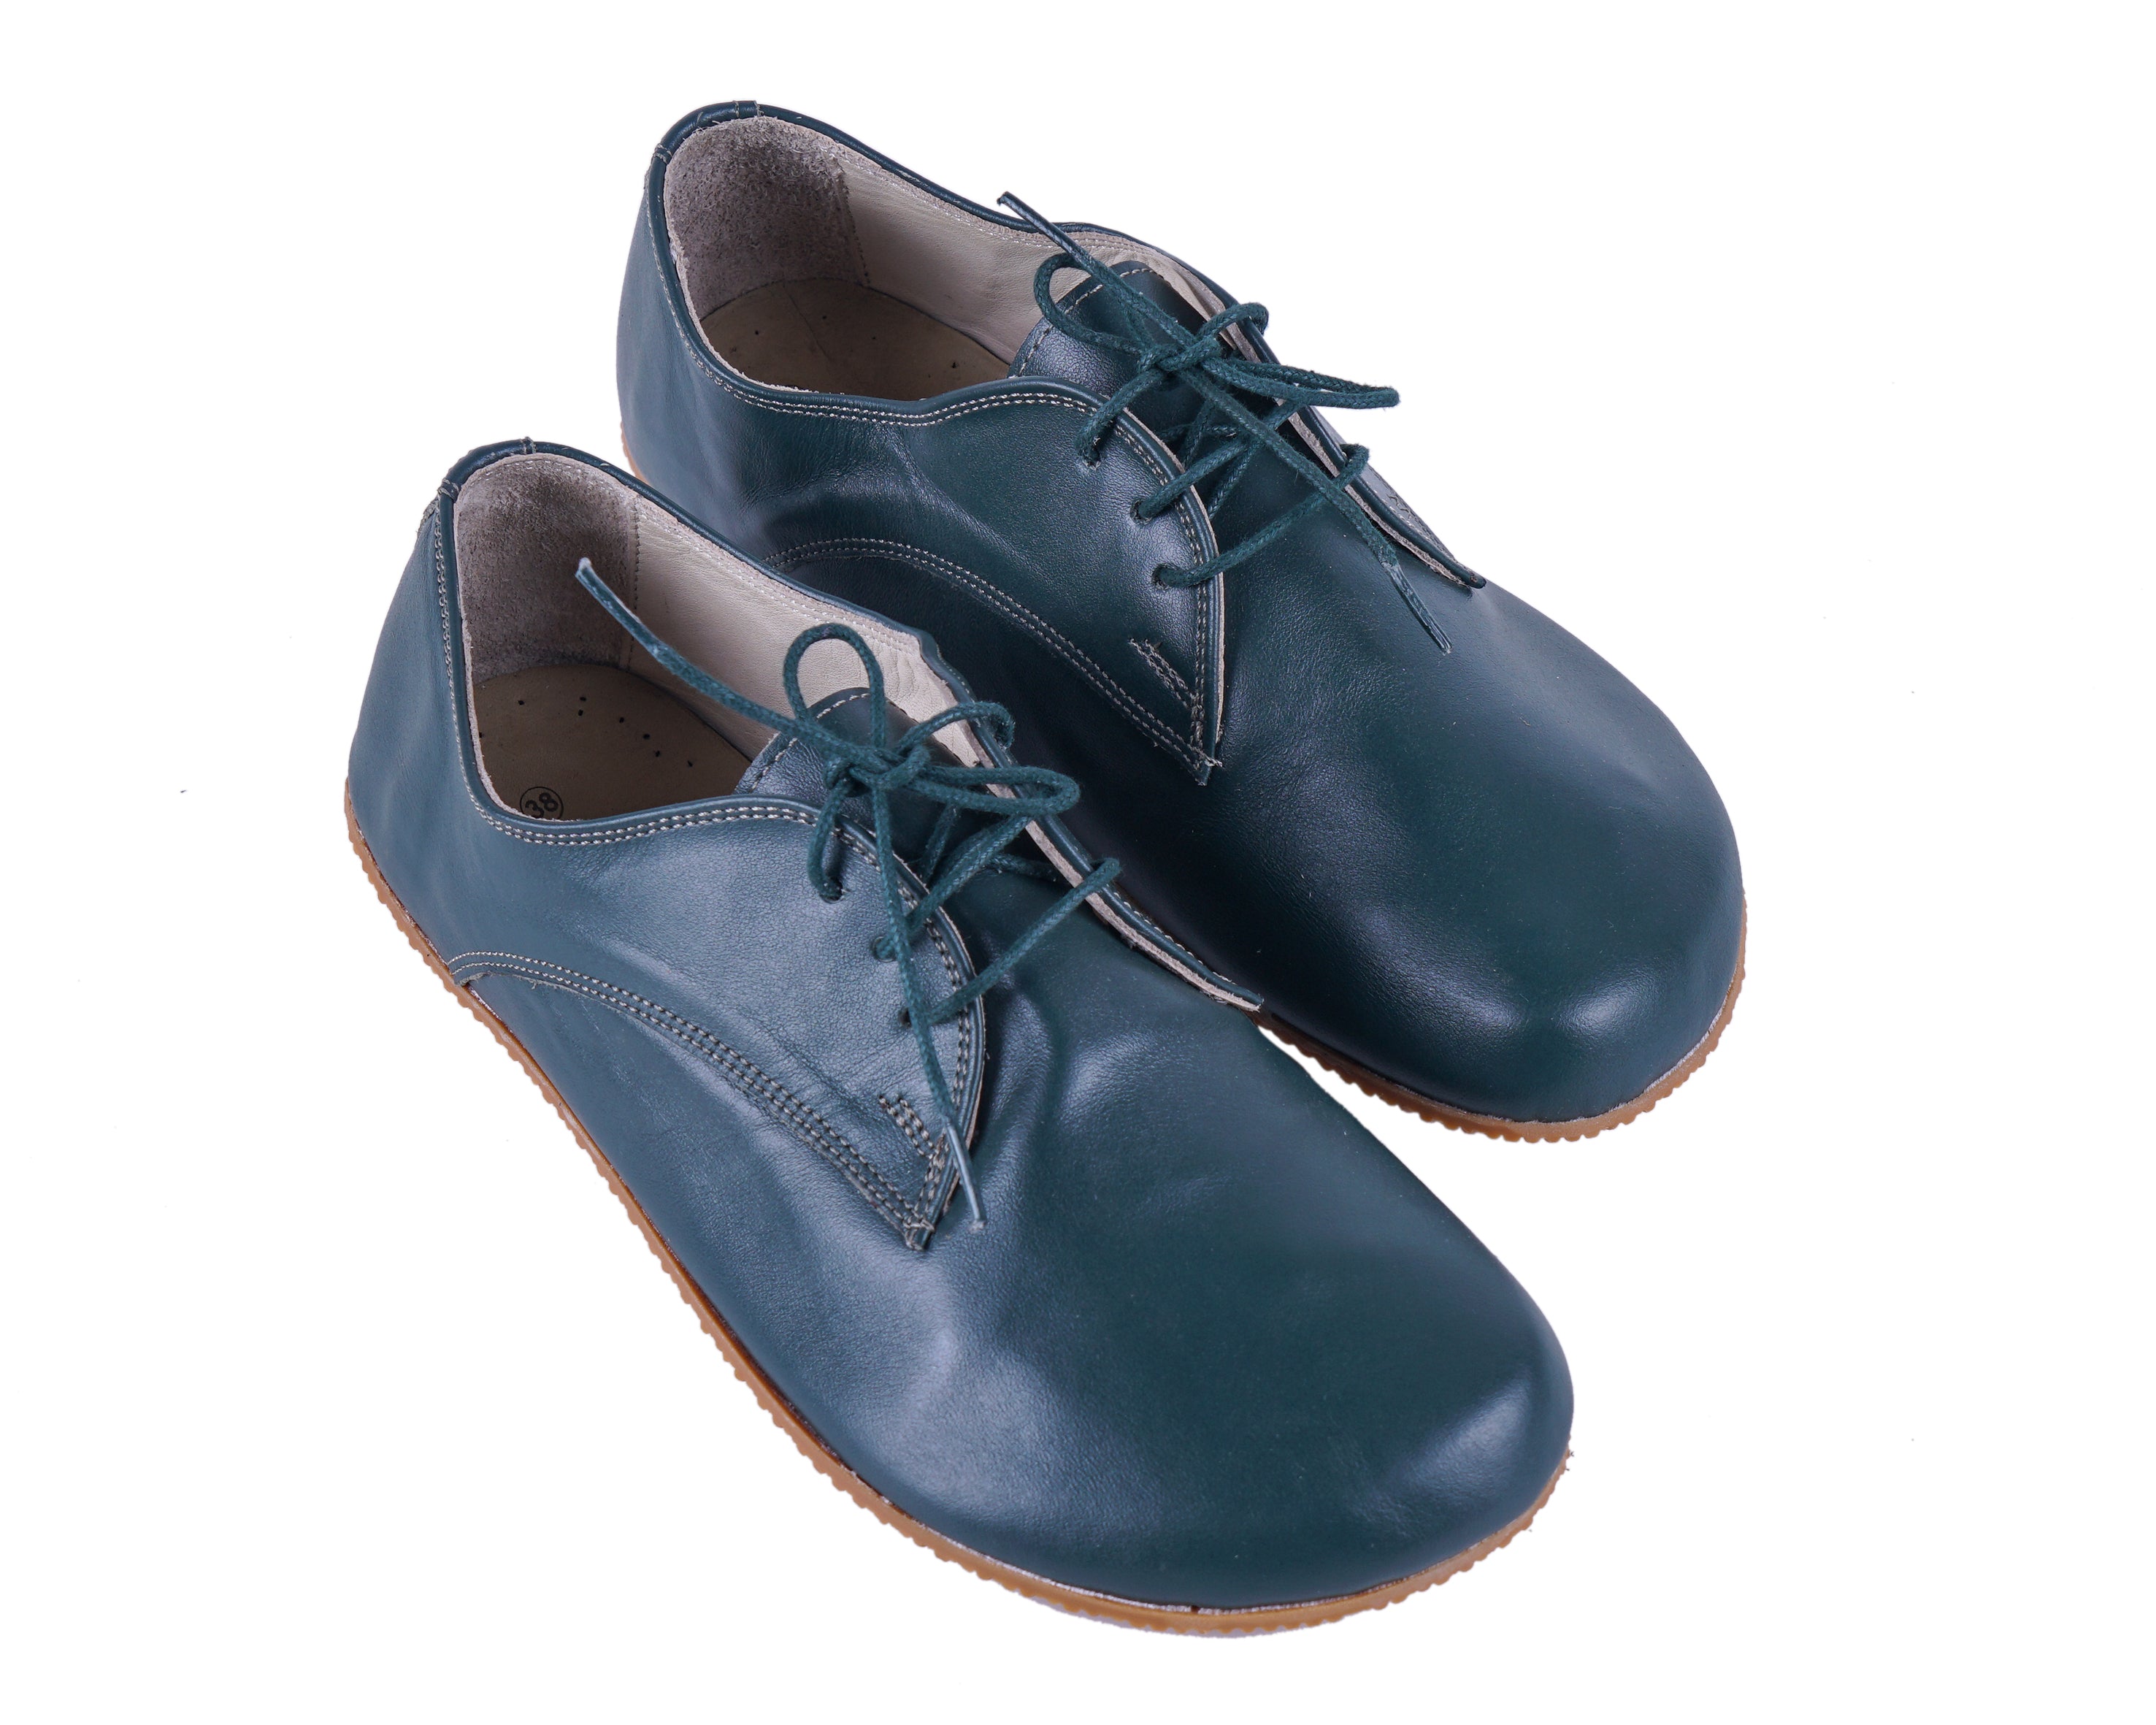 Green Oxford Wide Barefoot Shoes Smooth Leather Handmade 4mm Rubber Outsole